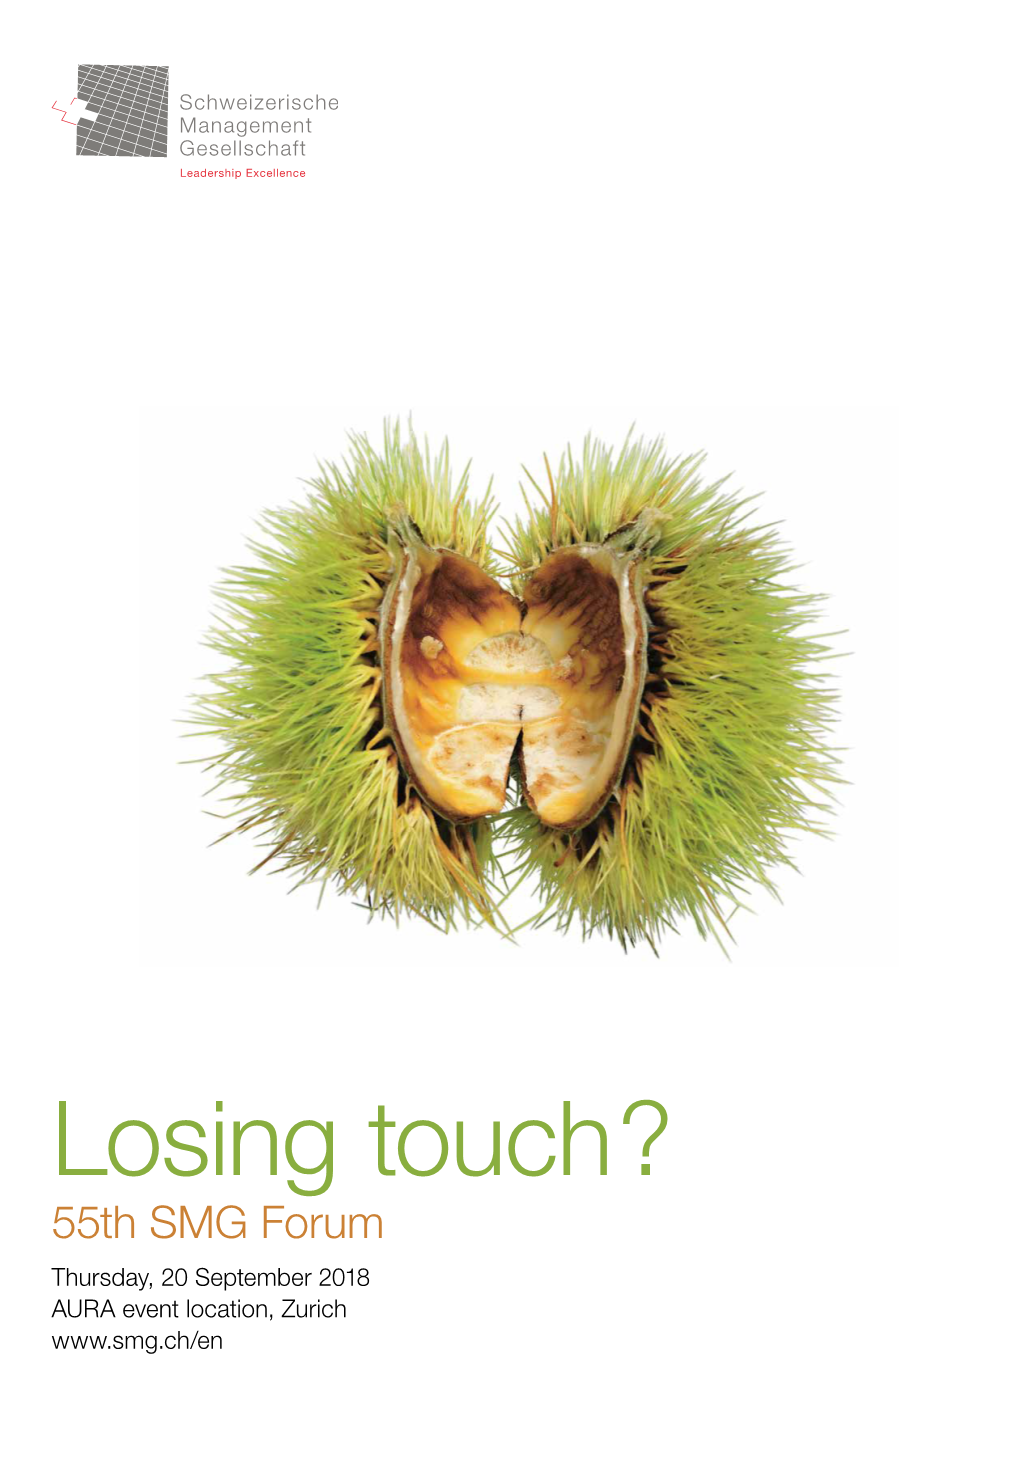 Losing Touch ? 55Th SMG Forum Thursday, 20 September 2018 AURA Event Location, Zurich SMG Forum